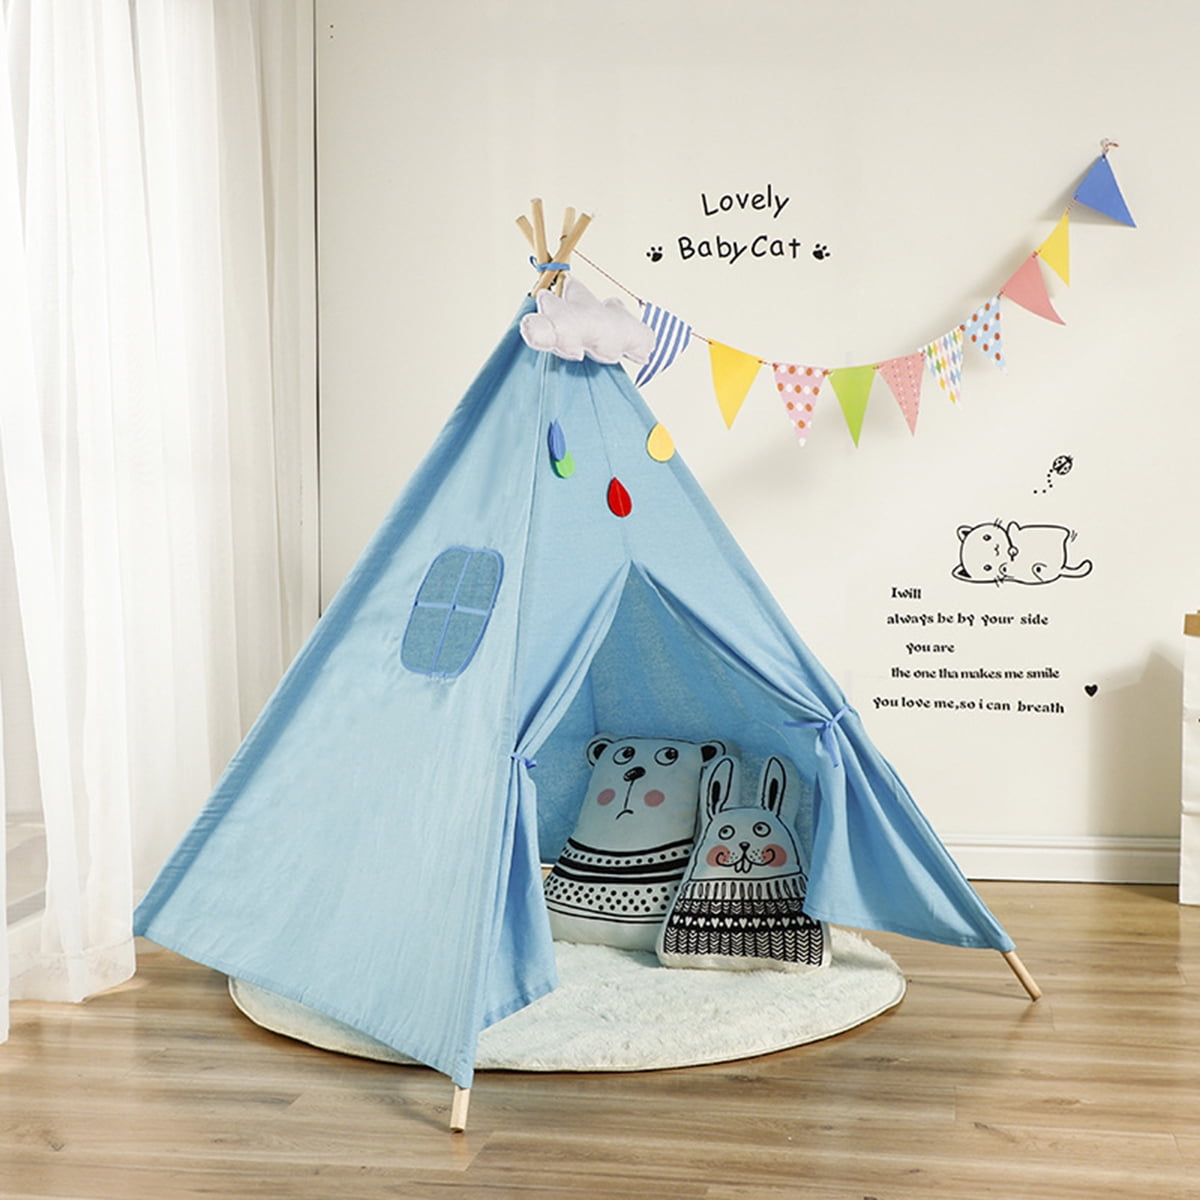 Large Kids Teepee Indoor Play Tent Cotton Canvas Children Indian Tipi Playhouse 